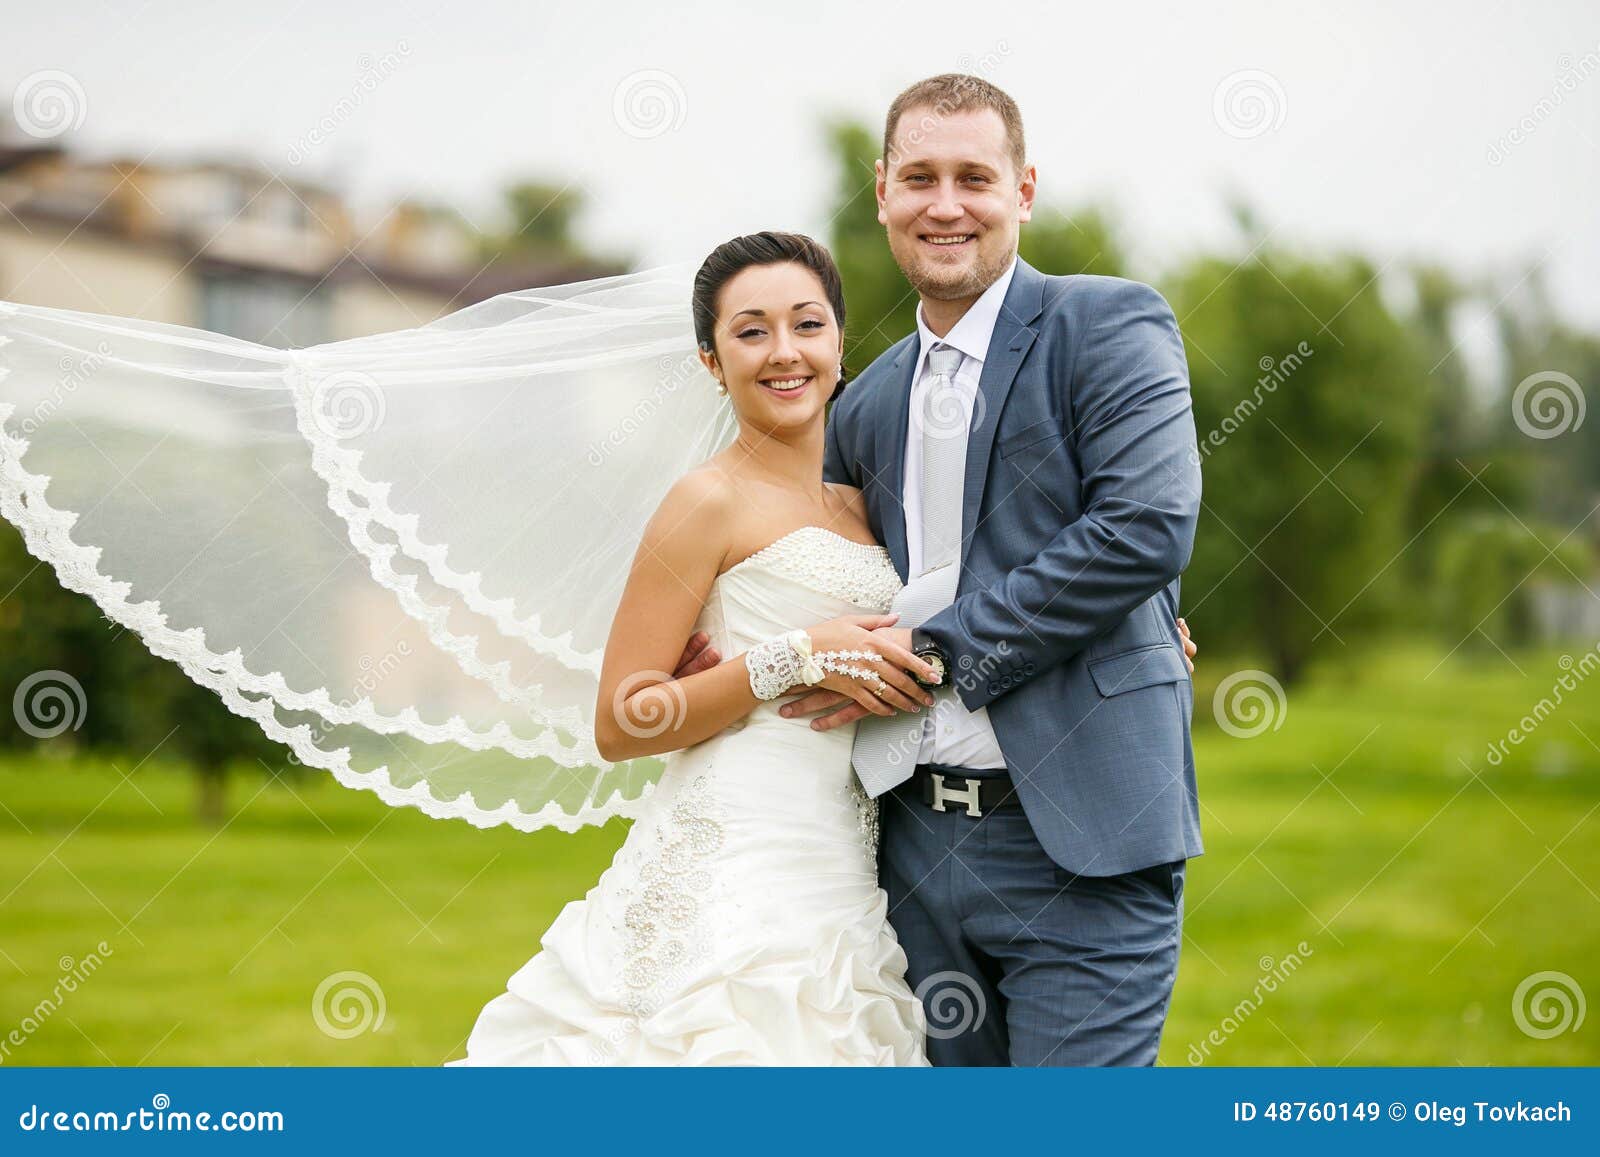 Bride And Groom Posing Together Outdoor On A Wedding Day Stock